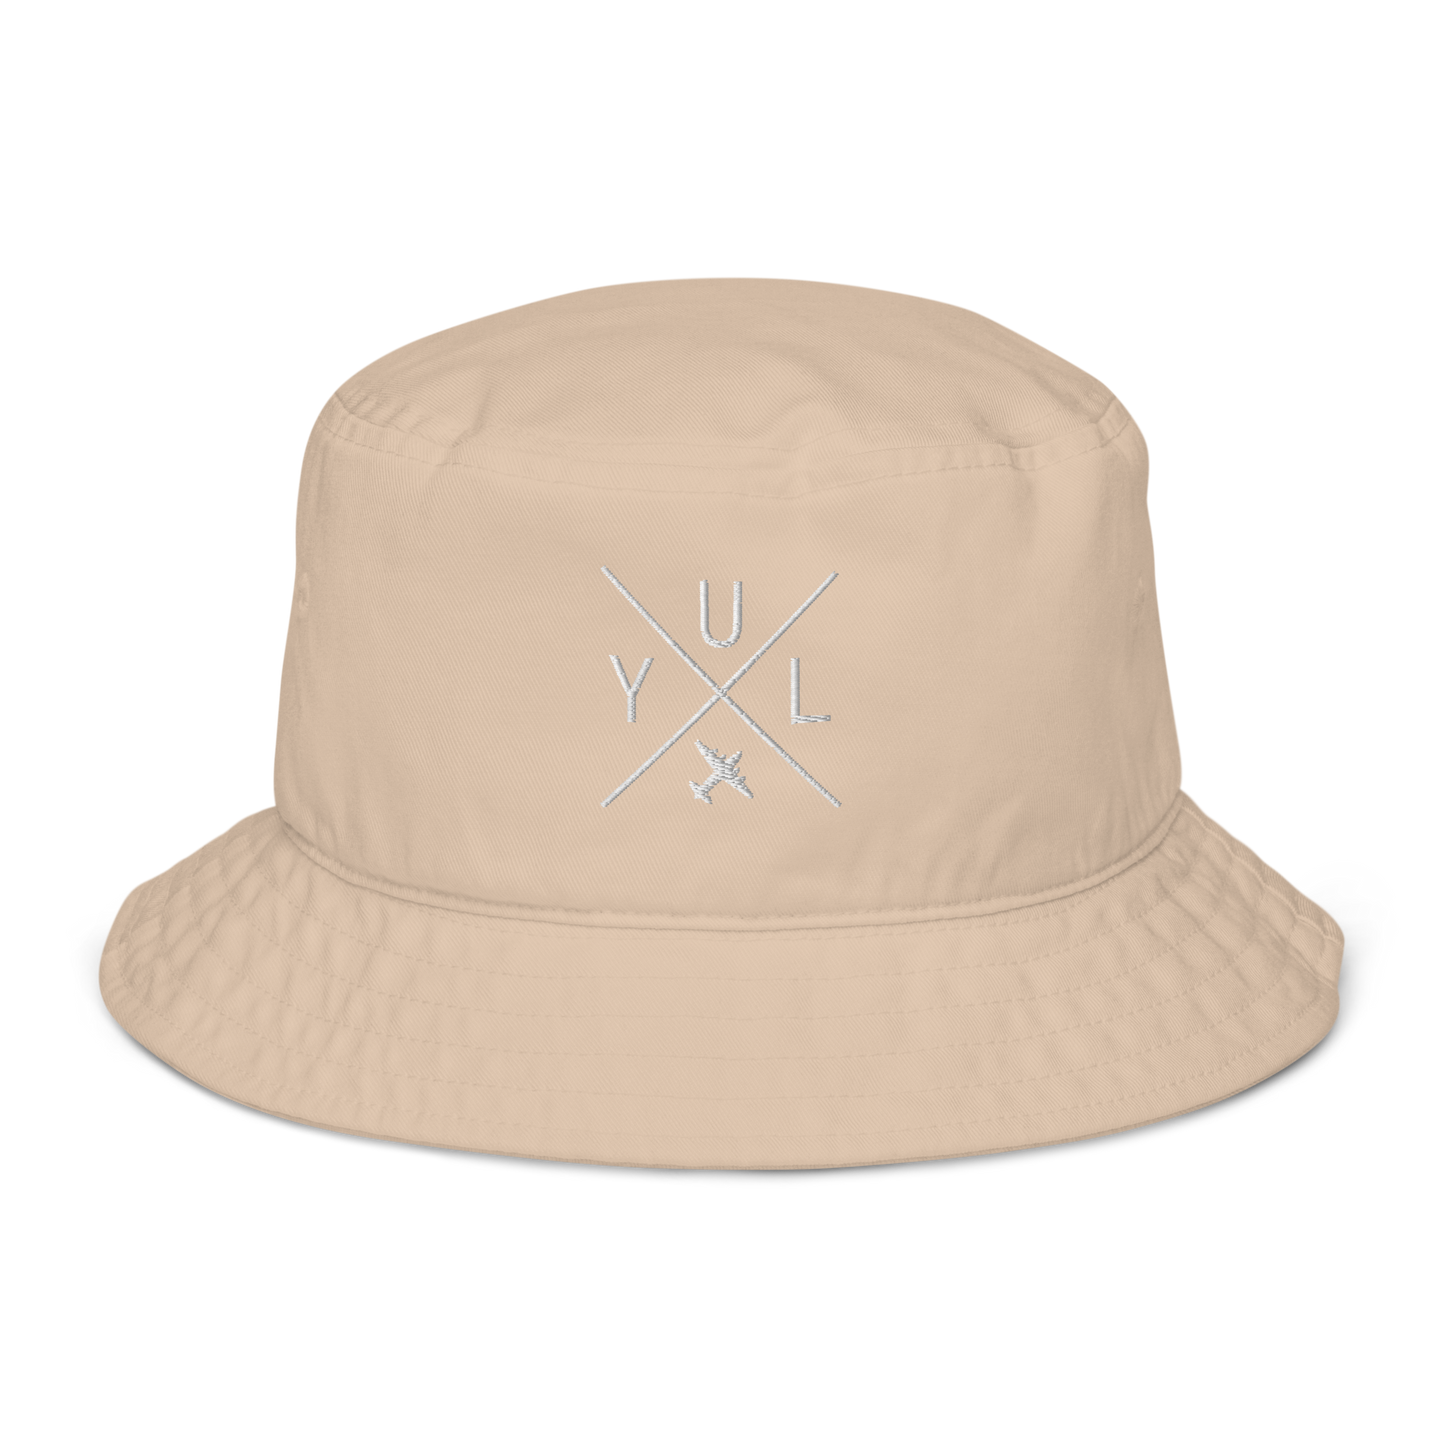 YHM Designs - YUL Montreal Organic Cotton Bucket Hat - Crossed-X Design with Airport Code and Vintage Propliner - White Embroidery - Image 08